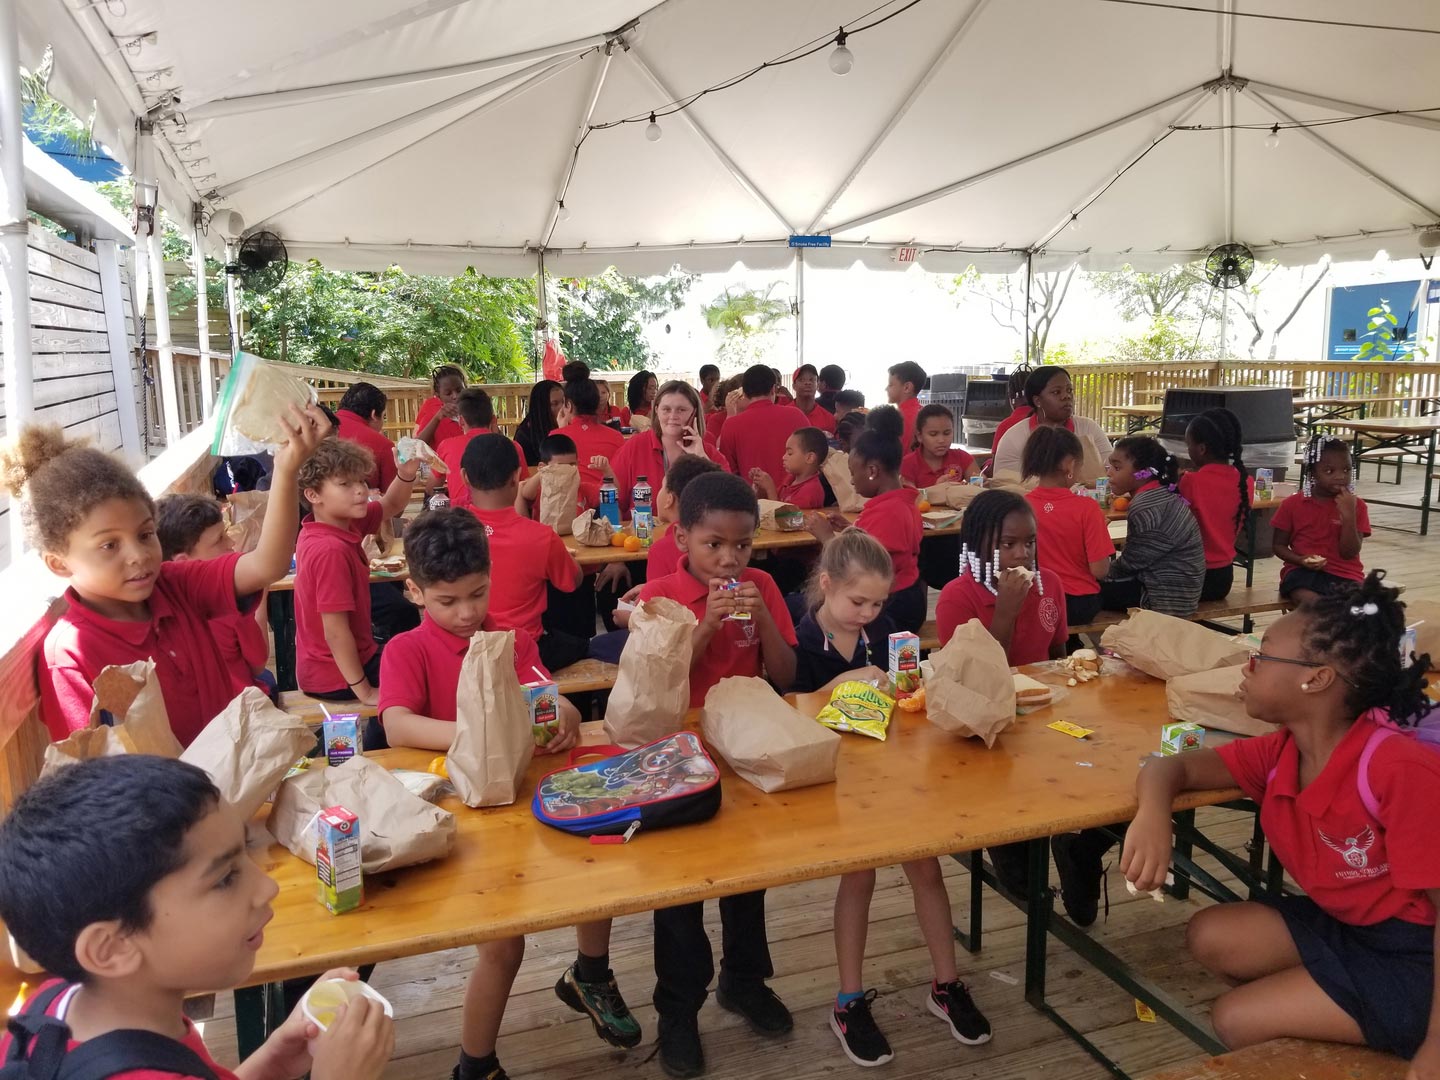 FSCA Kids Wearing Red Shirts Having Lunch On Sunny Day